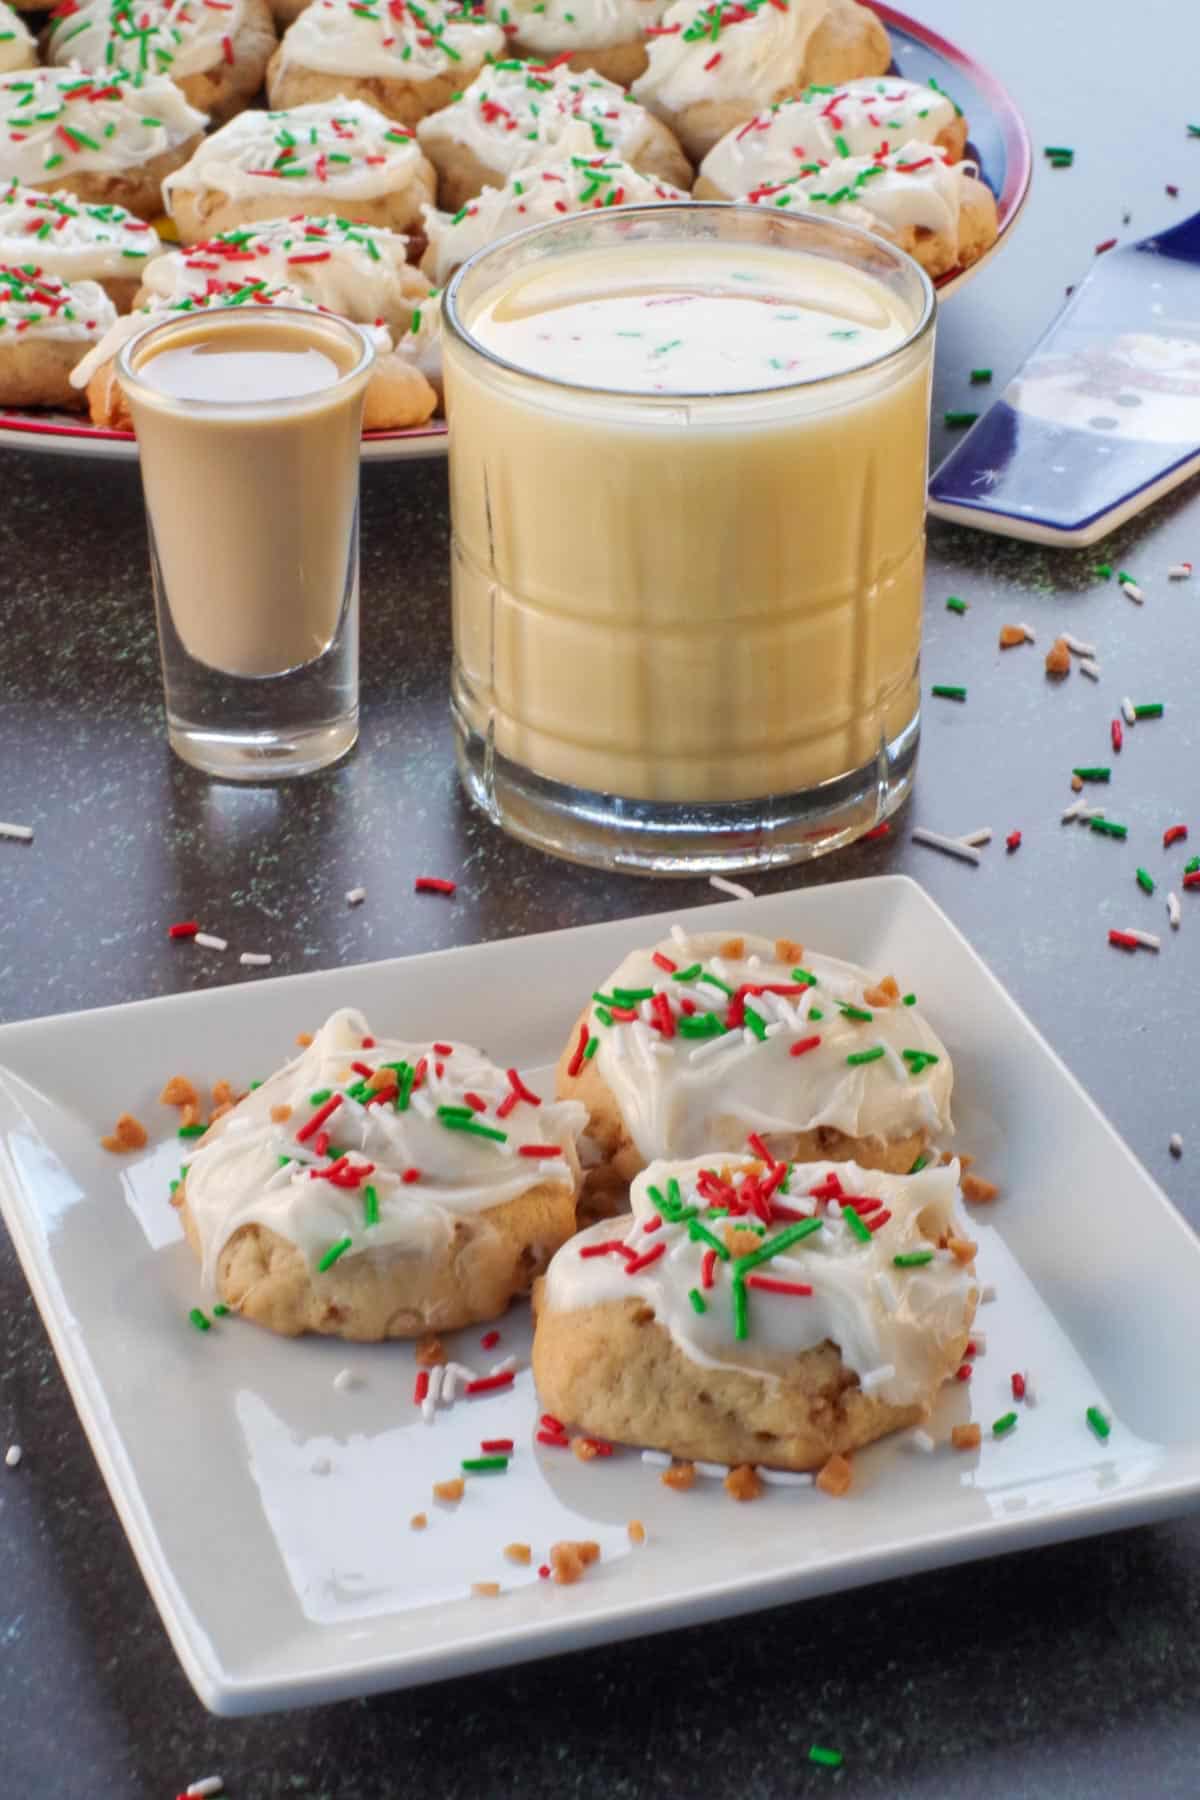 3 eggnog and baileys irish cream cookies on a white plate with a glass of eggnog and a shot of baileys in the background